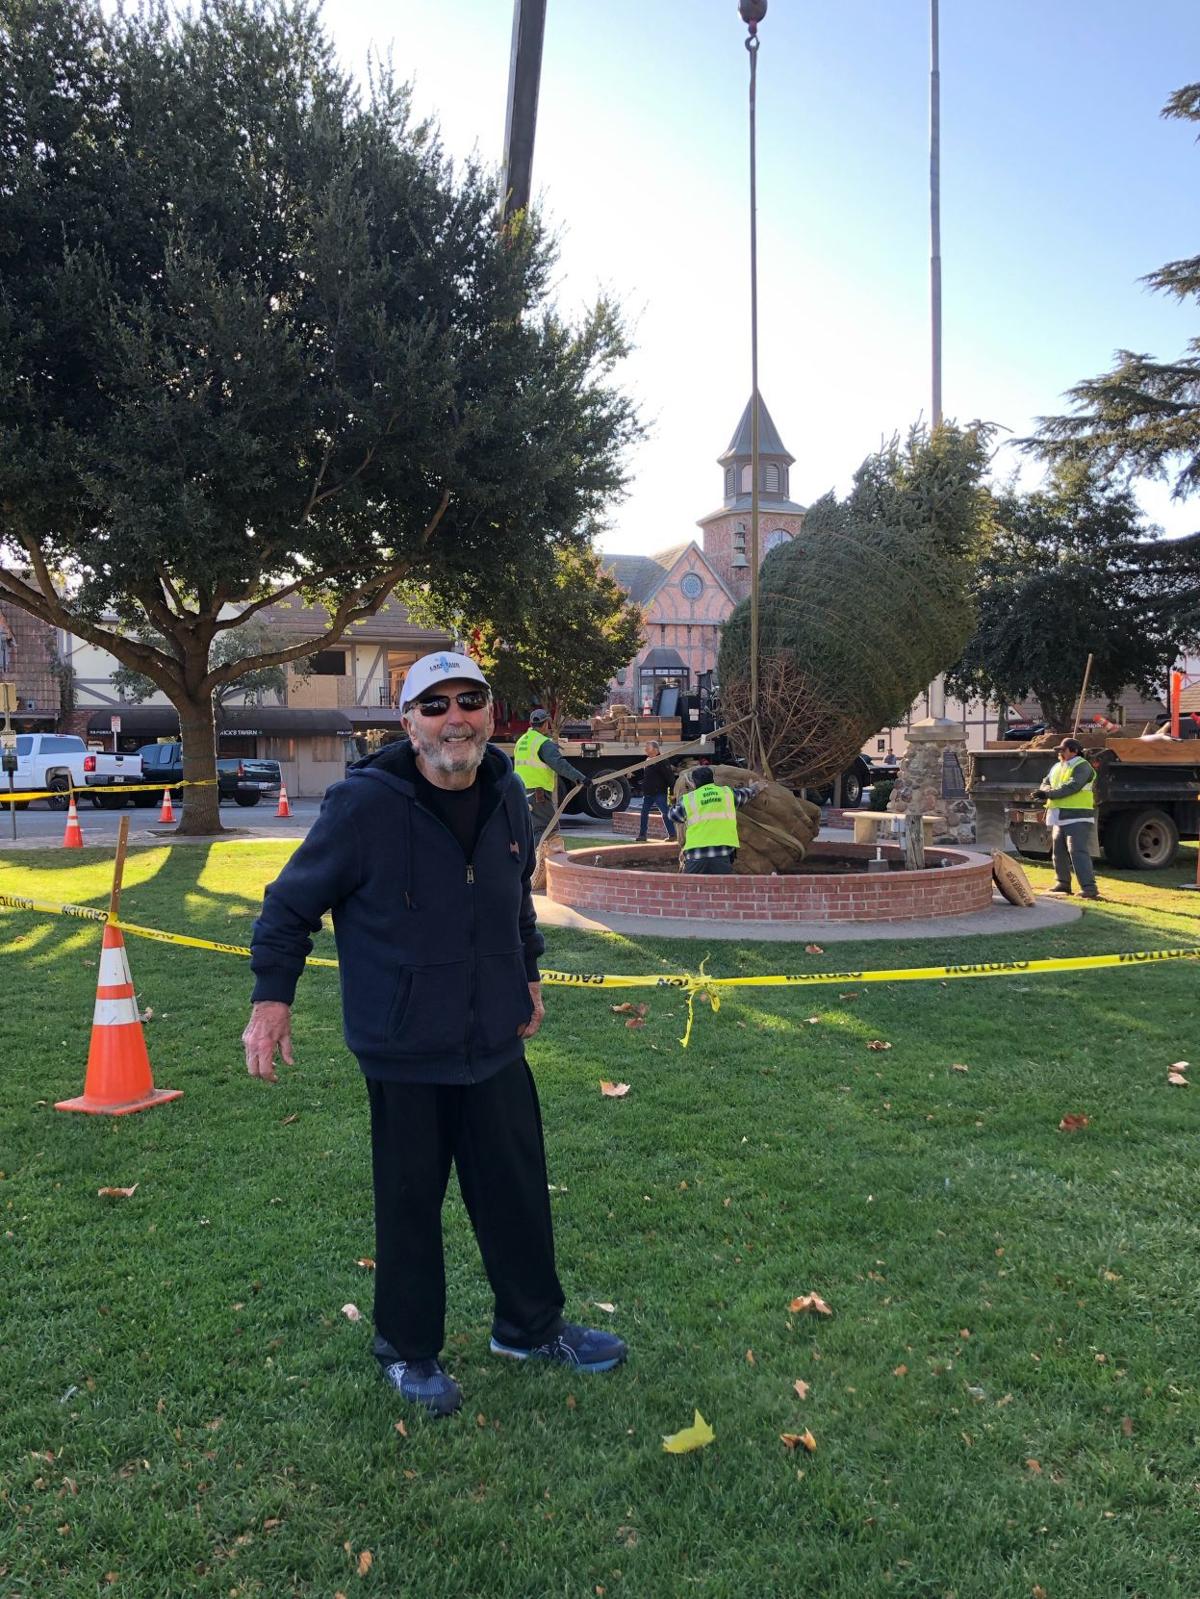 Sprucing it up: Solvang celebrates planting of live Christmas tree in town center ...